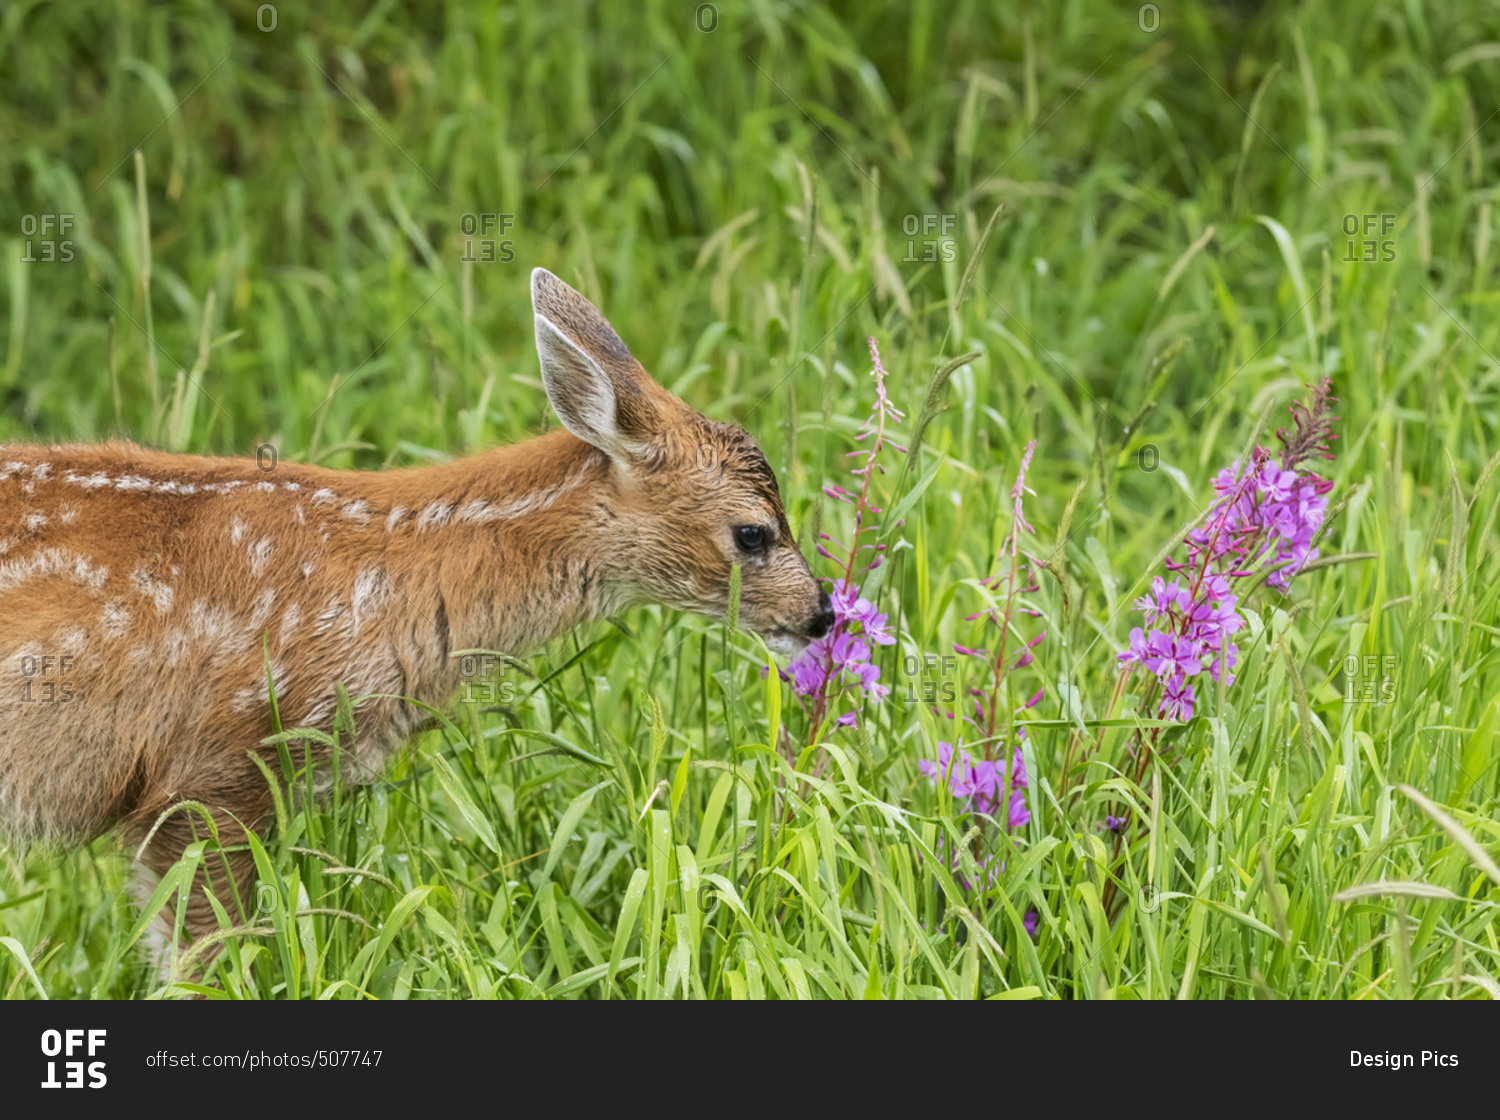 Sitka Black-tailed deer fawn (Odocoileus hemionus sitkensis) munches on fireweed (Chamerion angustifolium) in pasture, captive animal at the Alaska Wildlife Conservation Centre; Portage, Alaska, United States of America